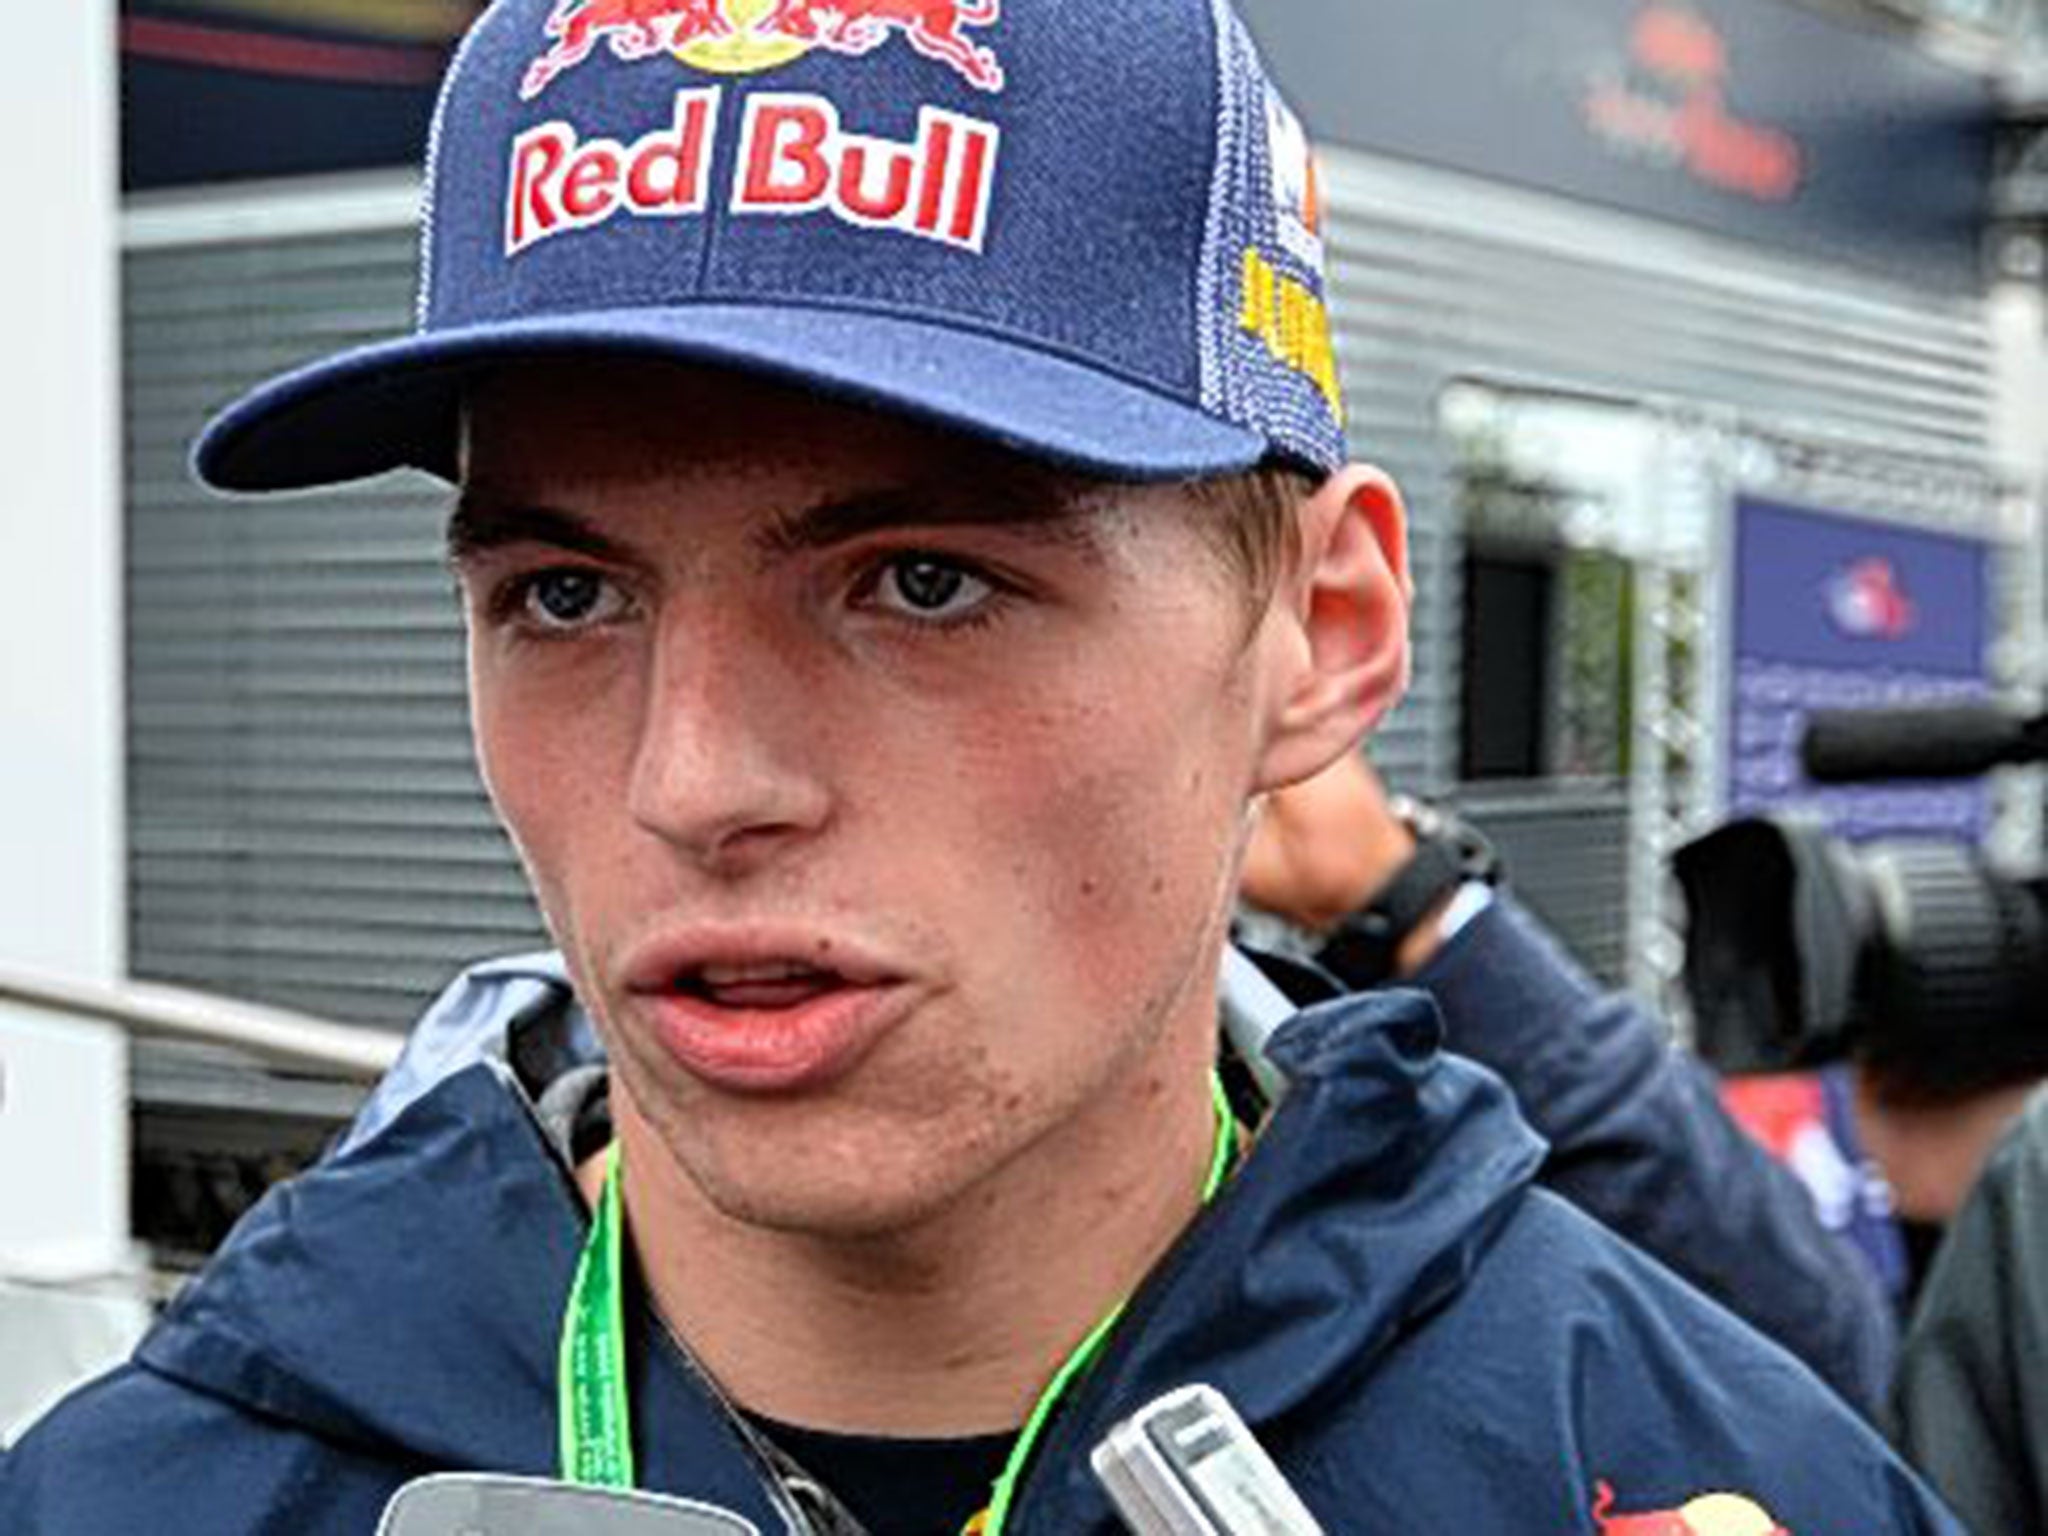 Max Verstappen Will Be The Youngest Driver In F1 History At 17